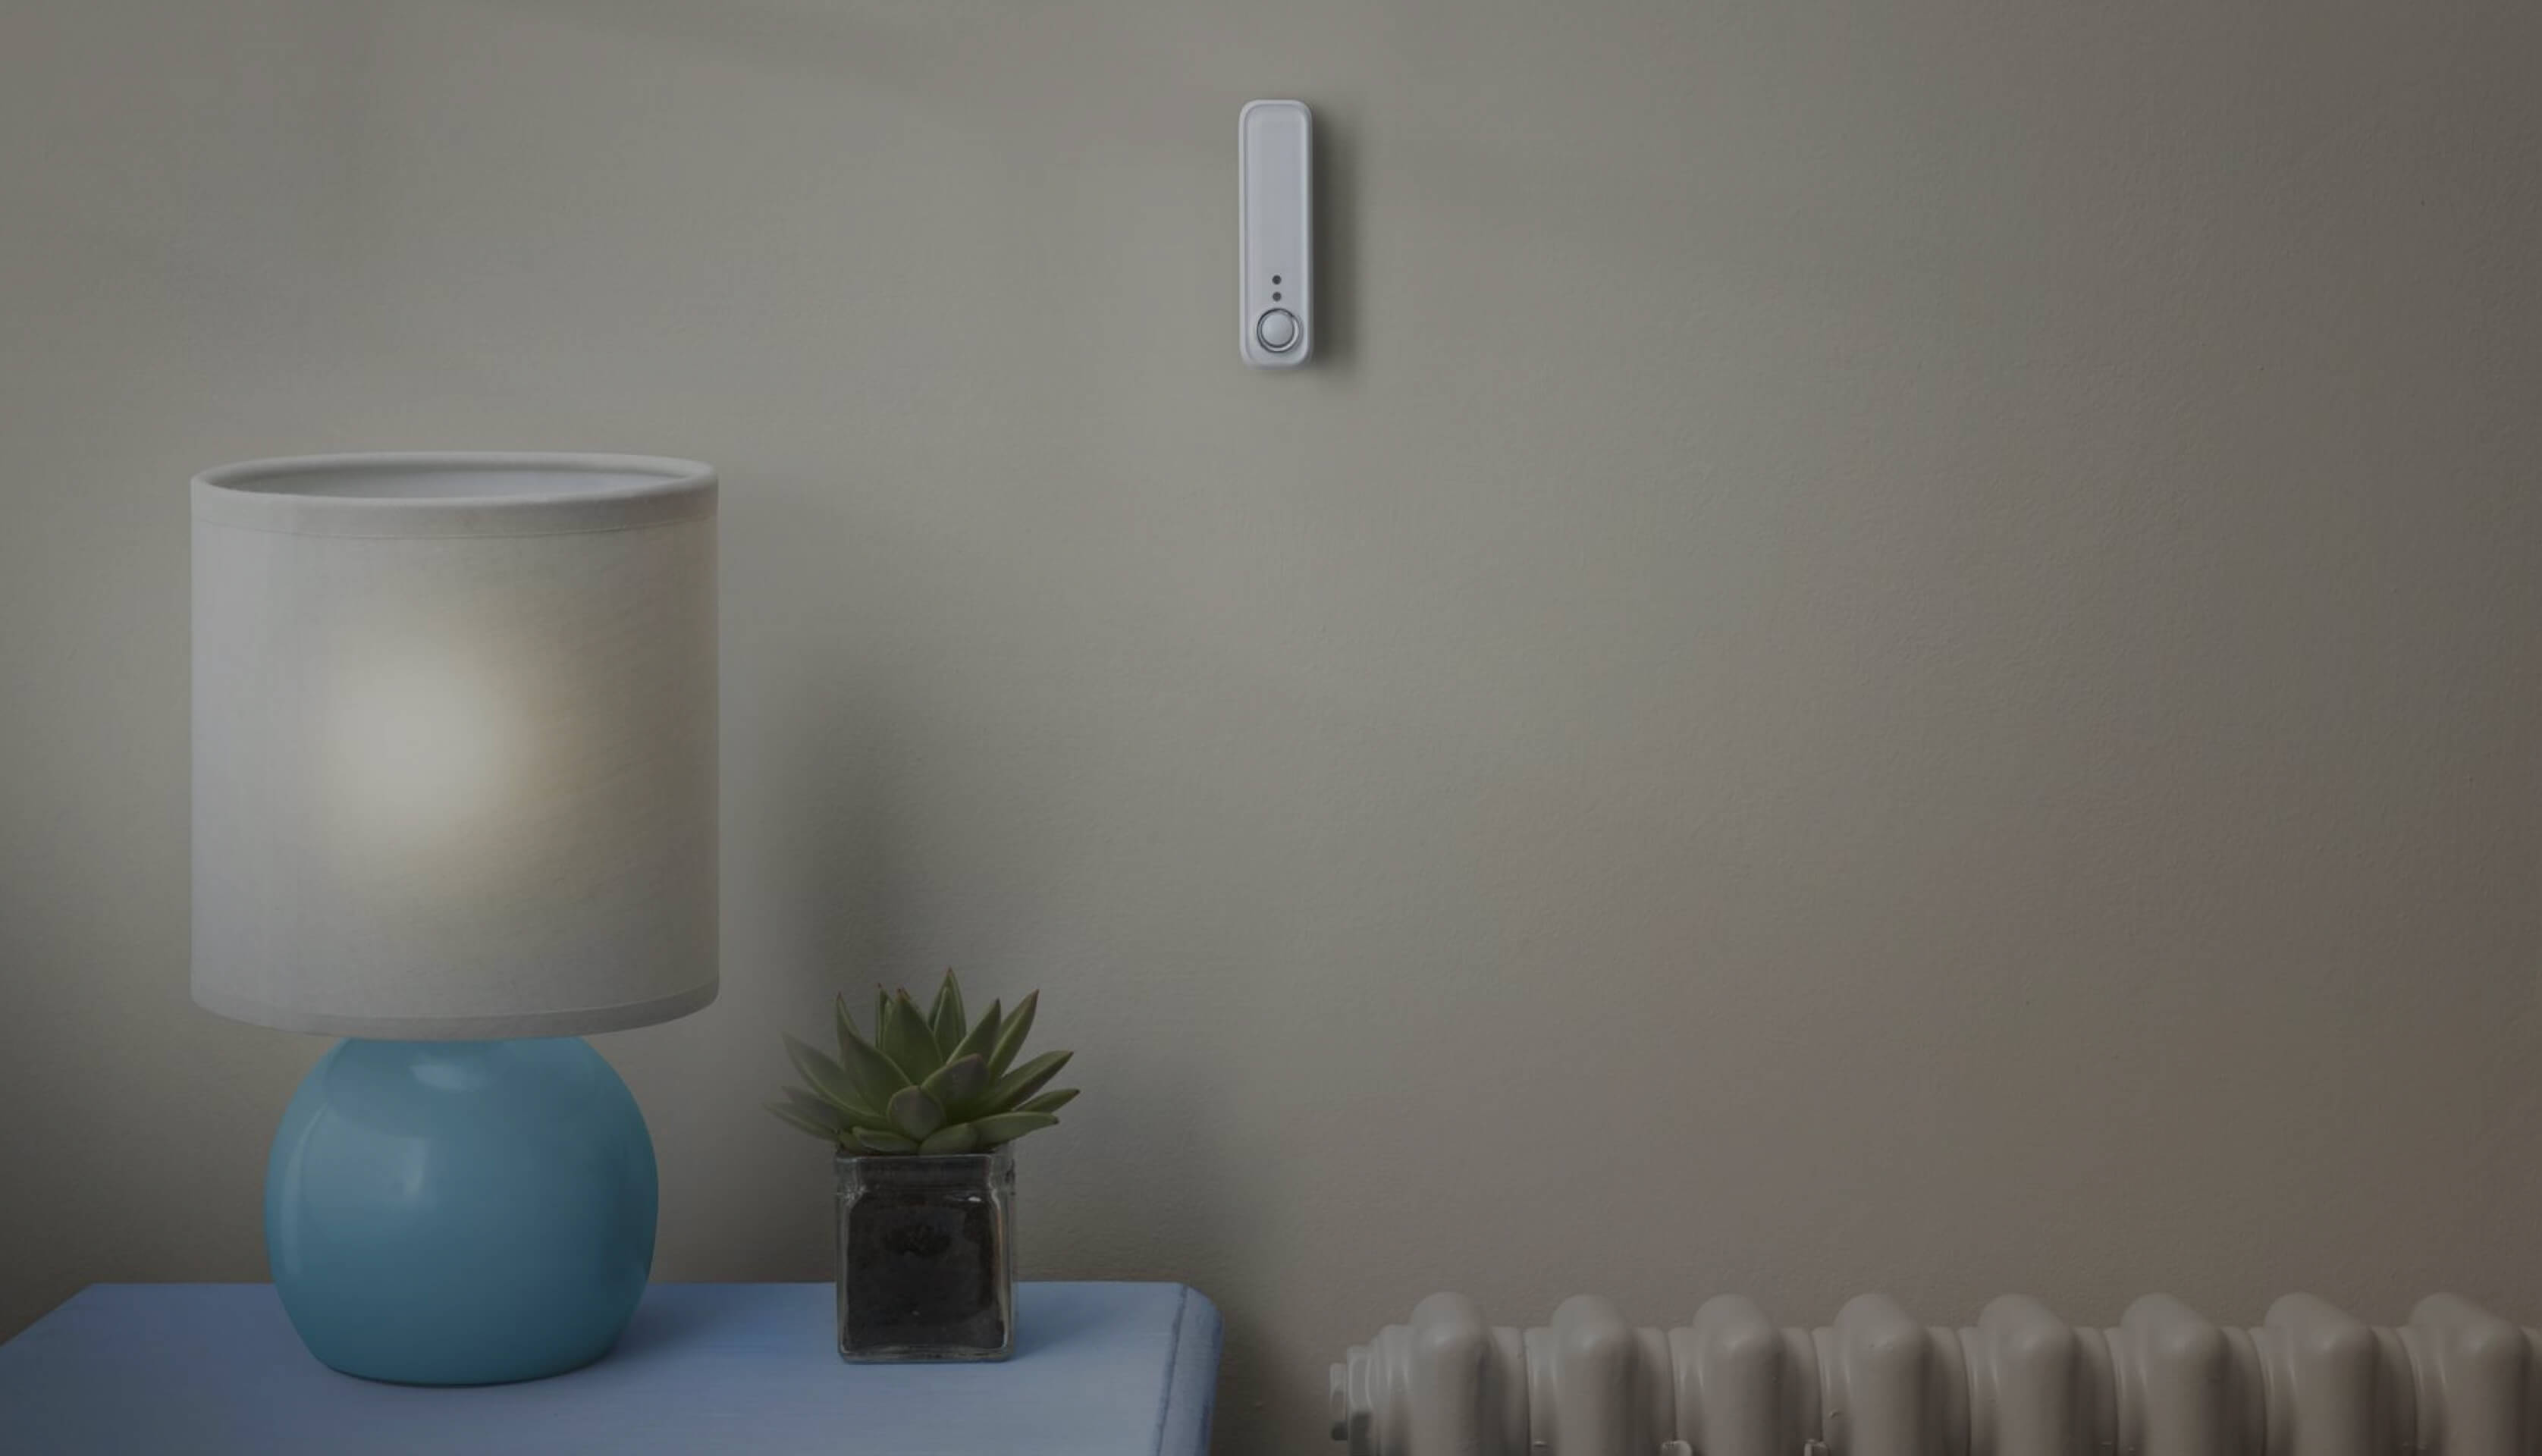 The Hive Smart Motion Sensor inside a living room fixed on the wall.